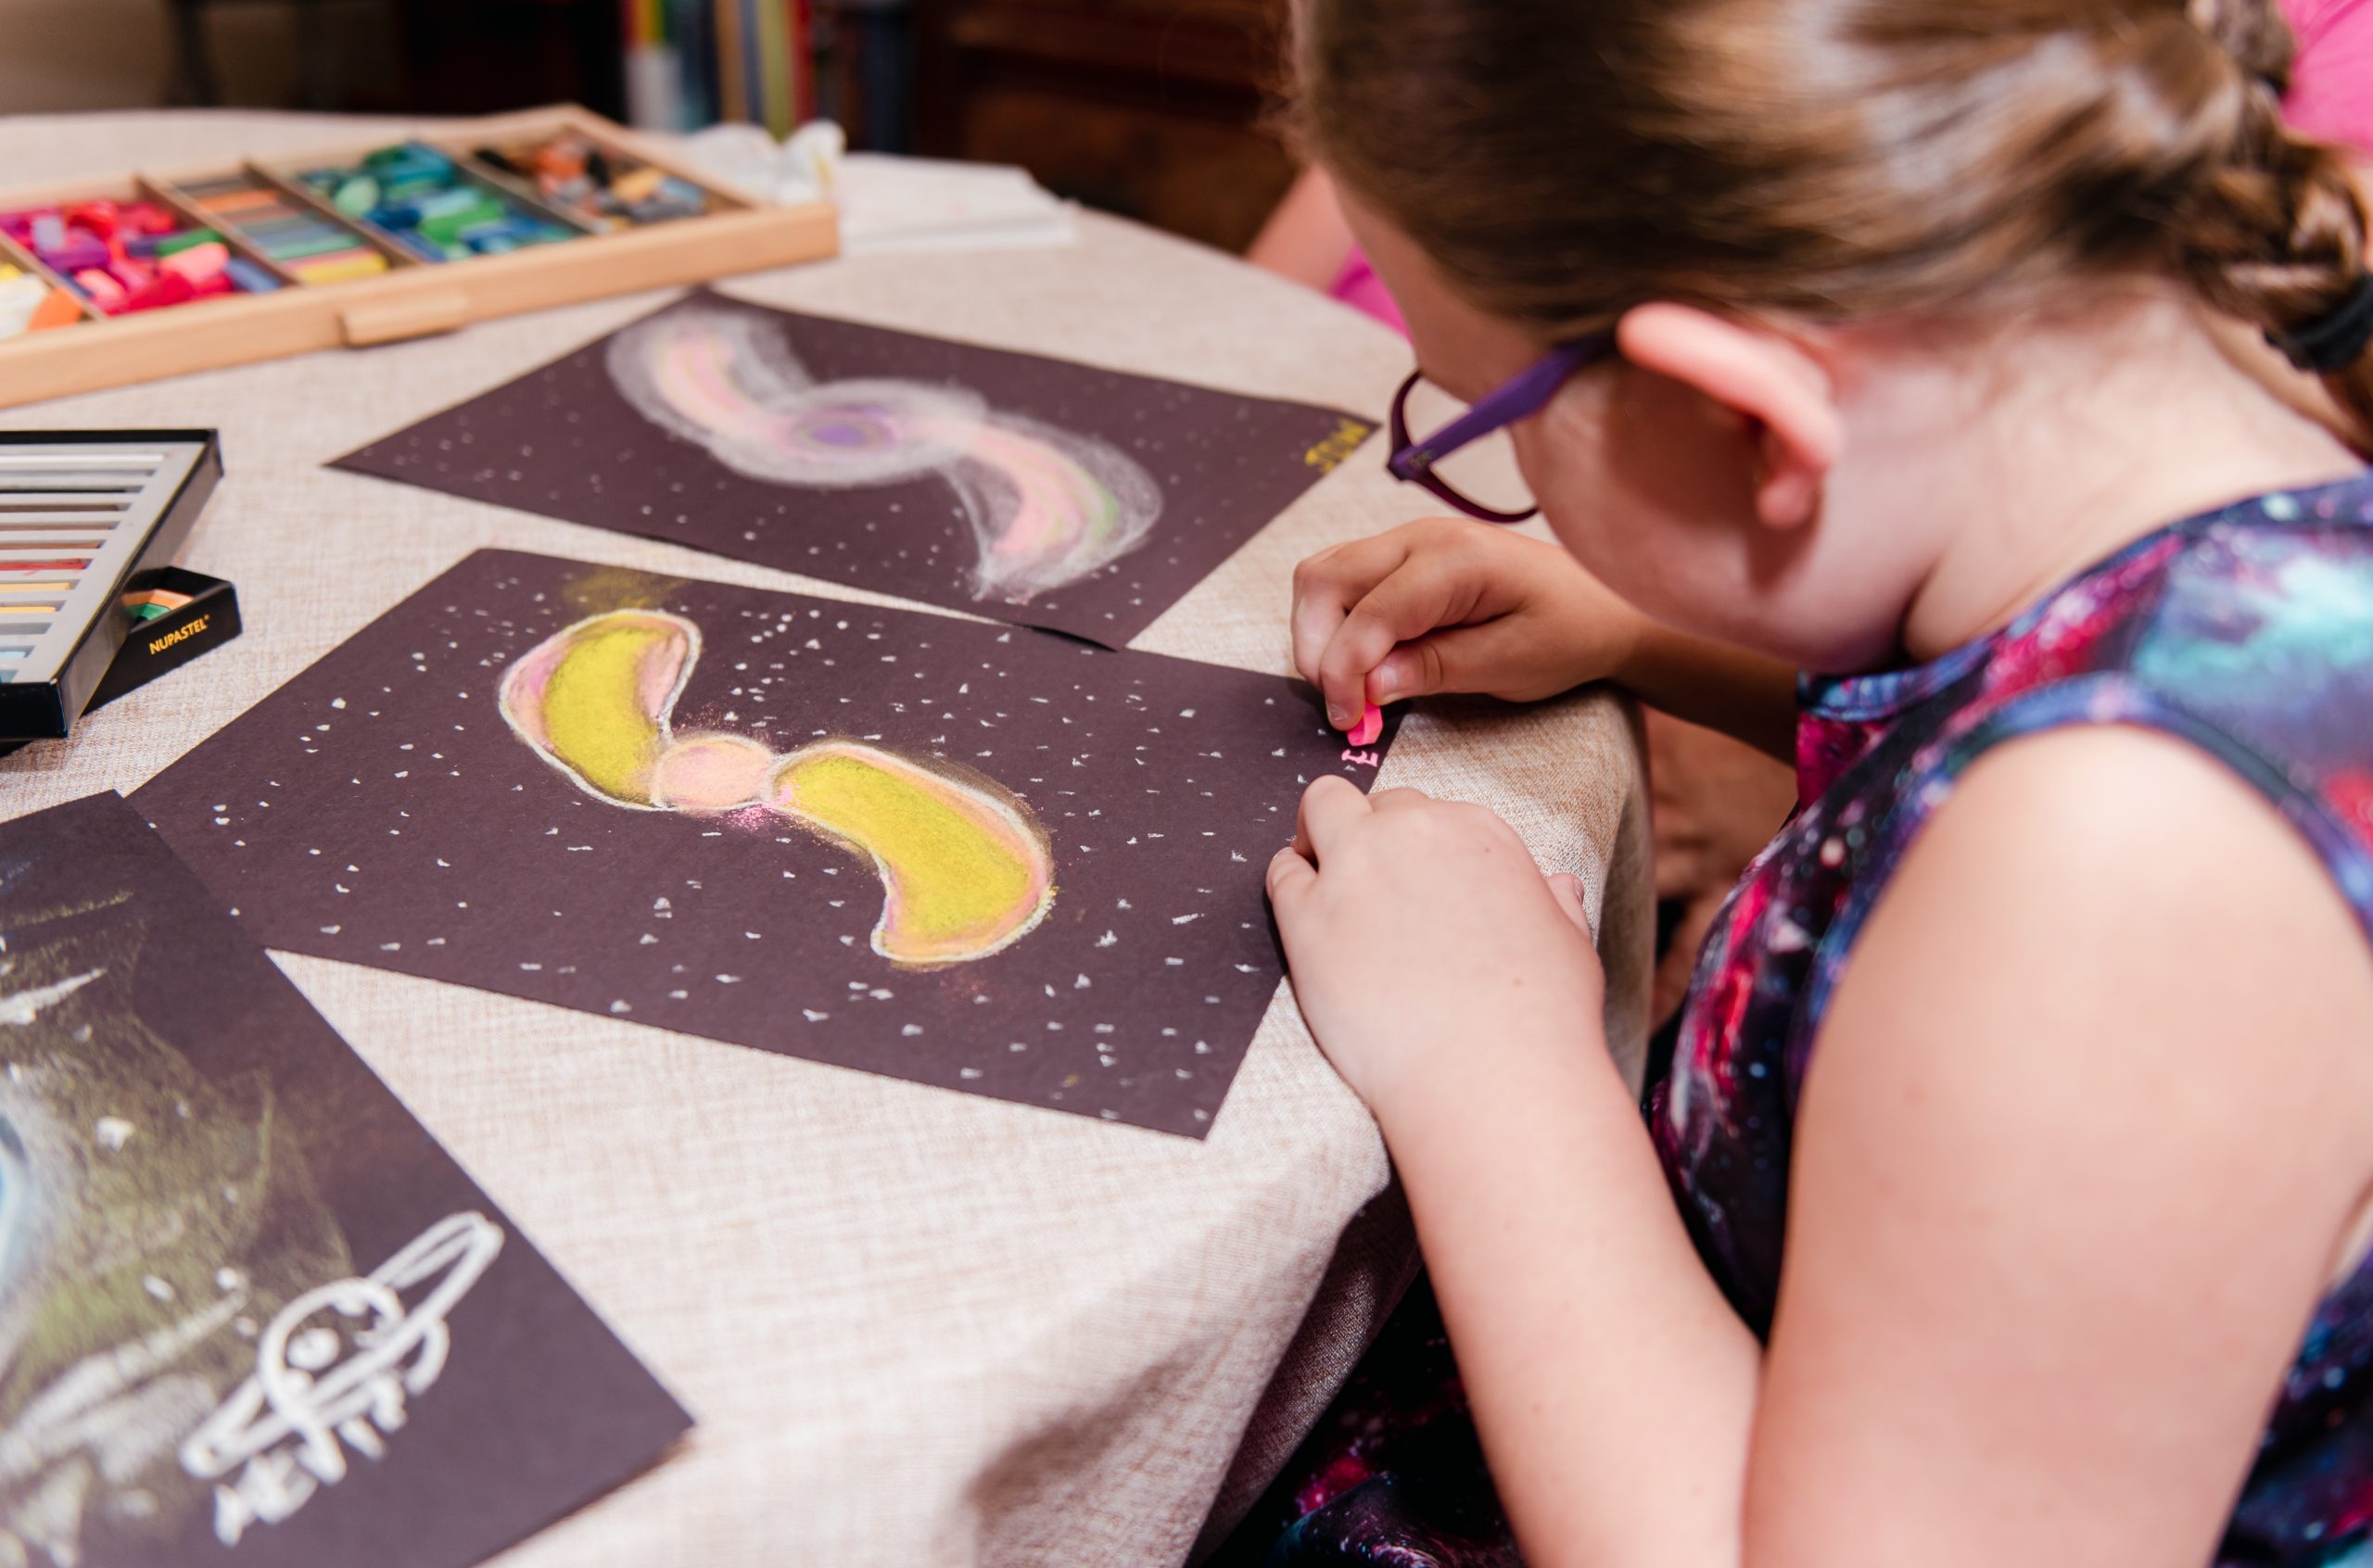 These homeschool art lessons for grades 4-6 allow you to add STEAM learning to your curriculum easily and effectively.